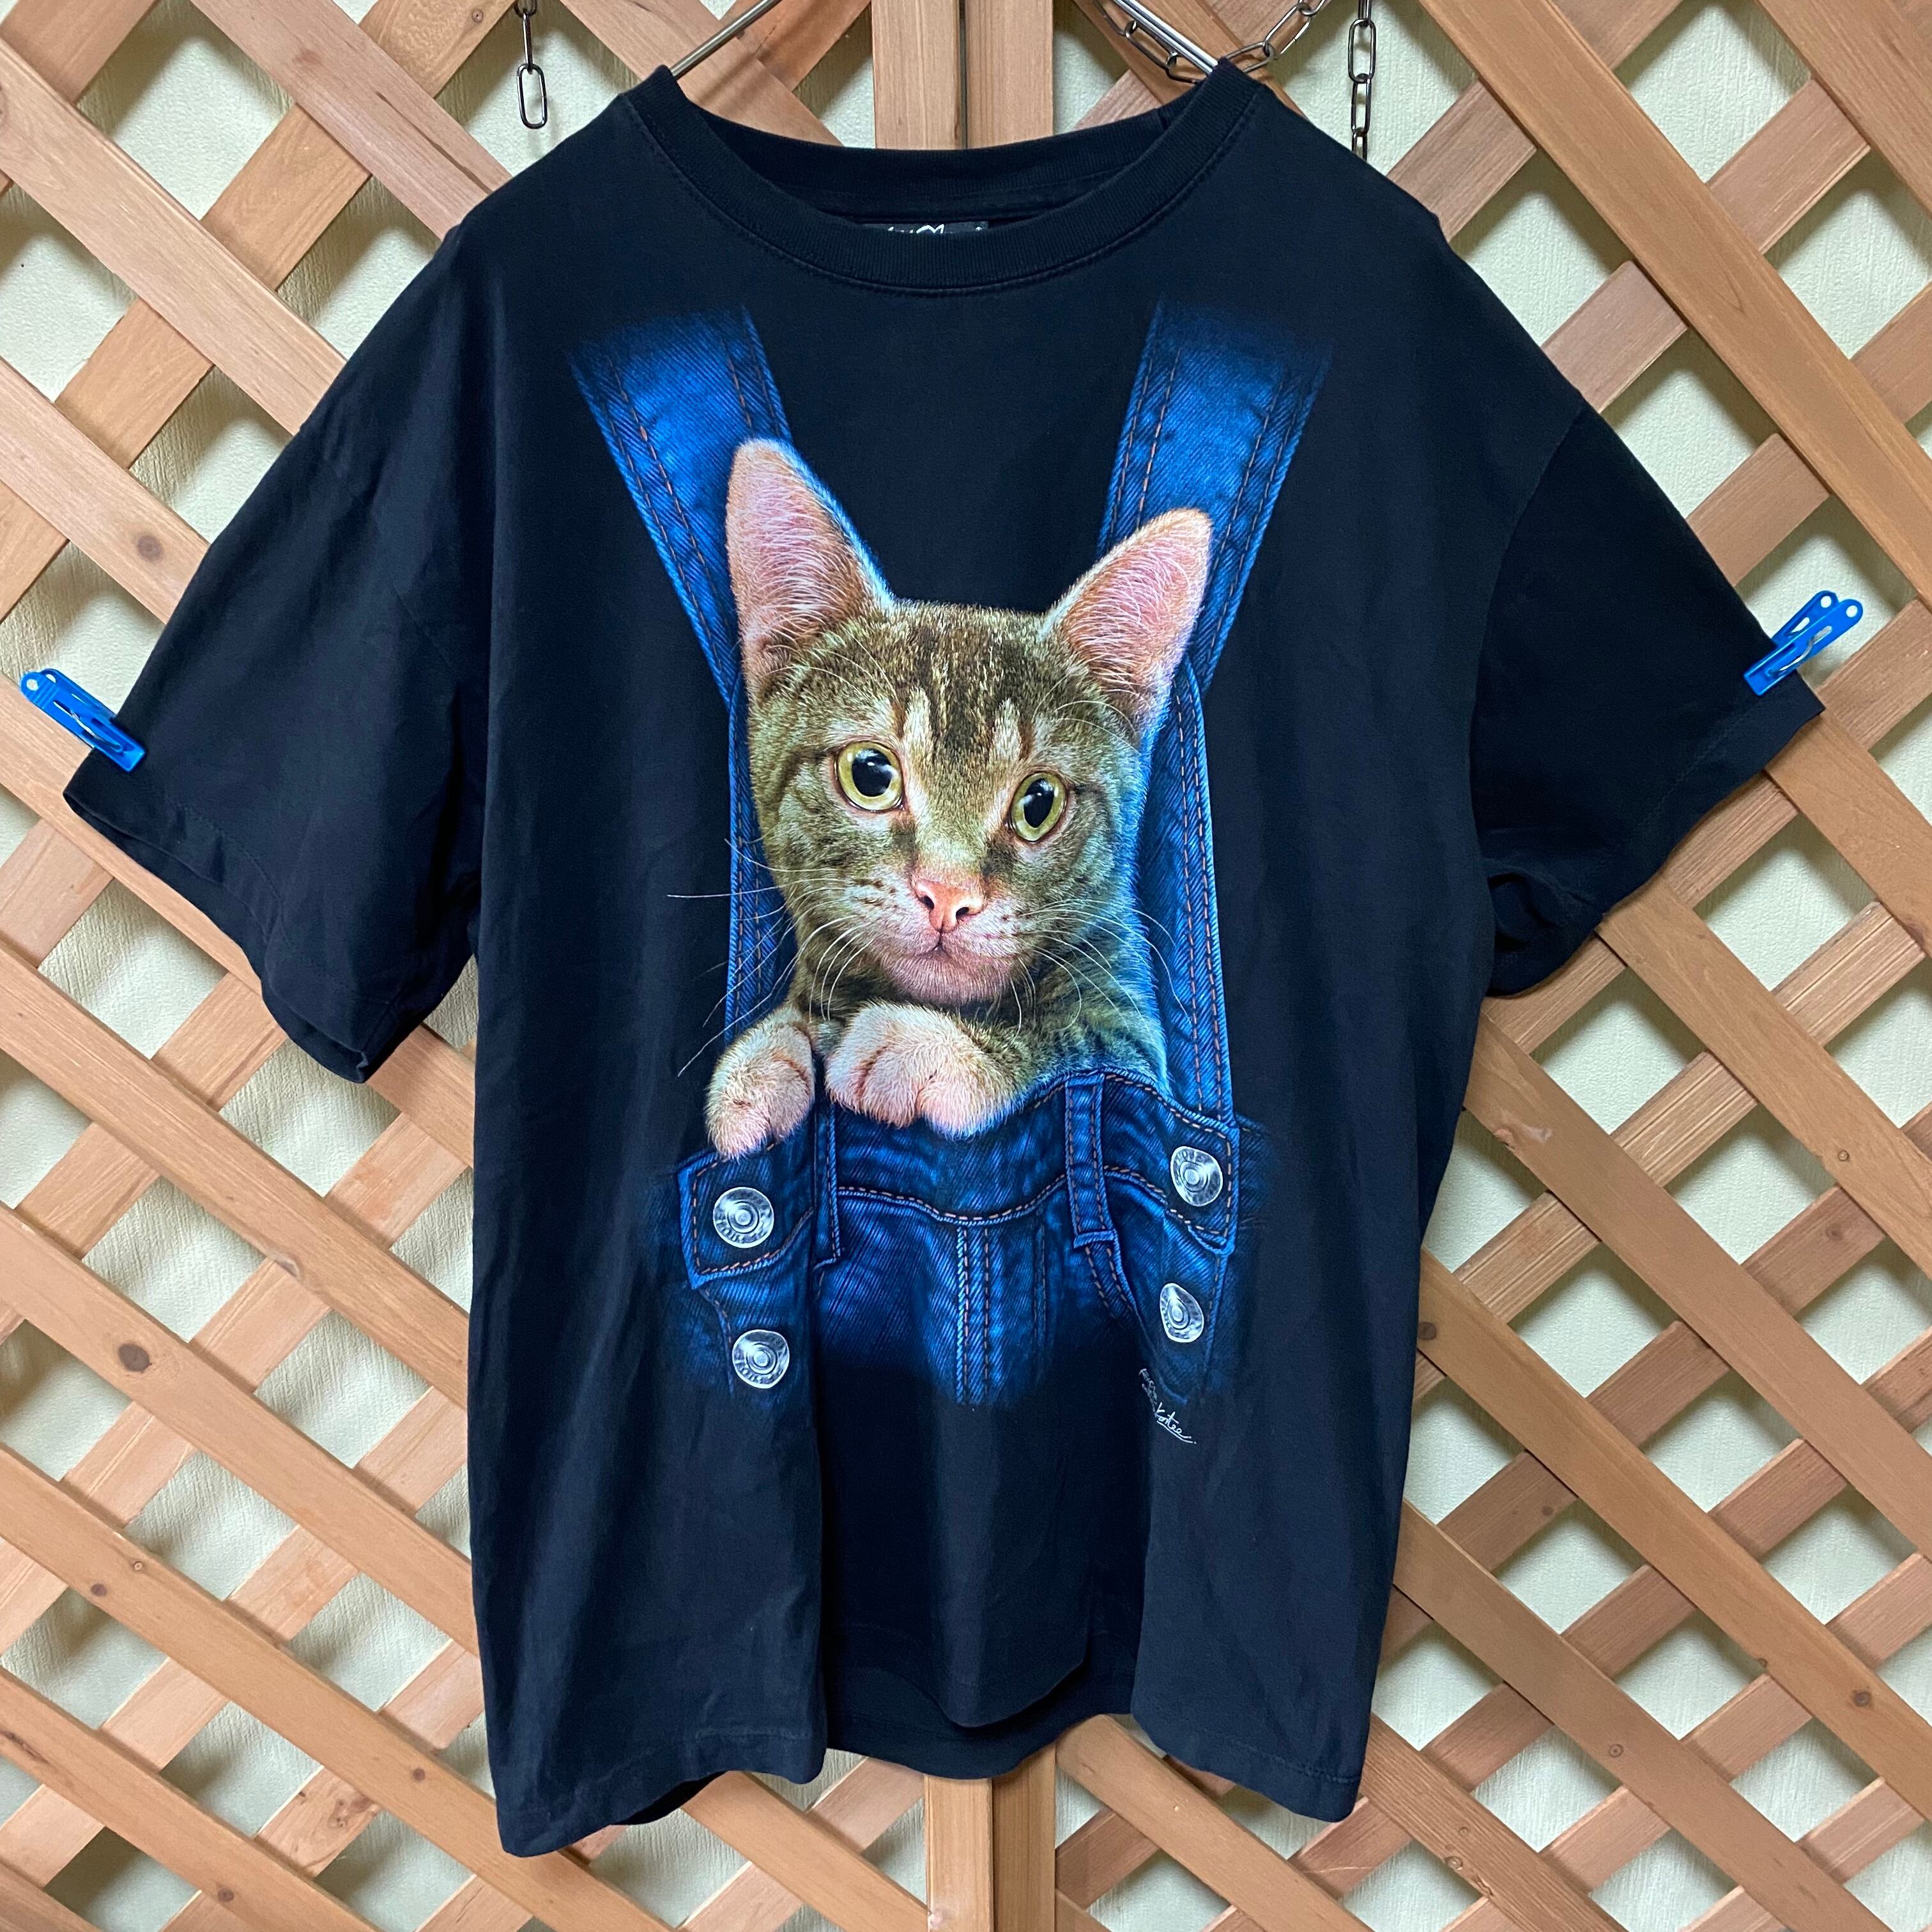 ROCK CHANG ロックチャン tシャツ 猫 キャット 両面プリント LUCKY BASE 古着屋